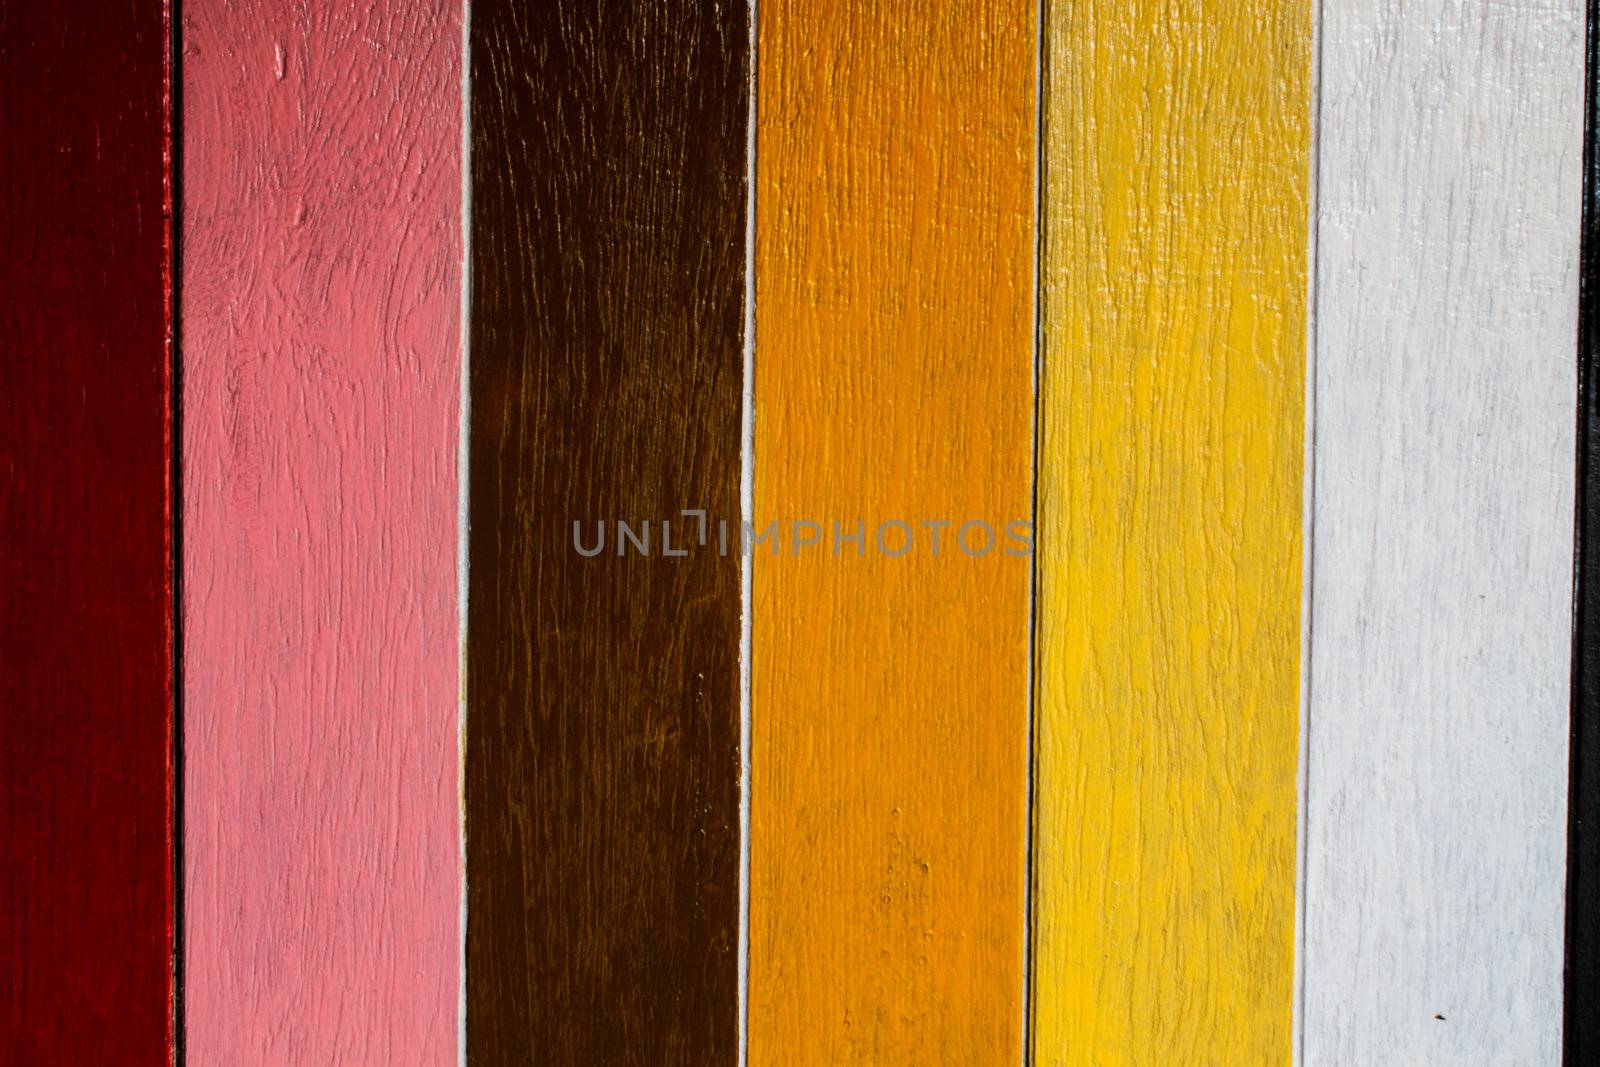 colorful wooden door or wall